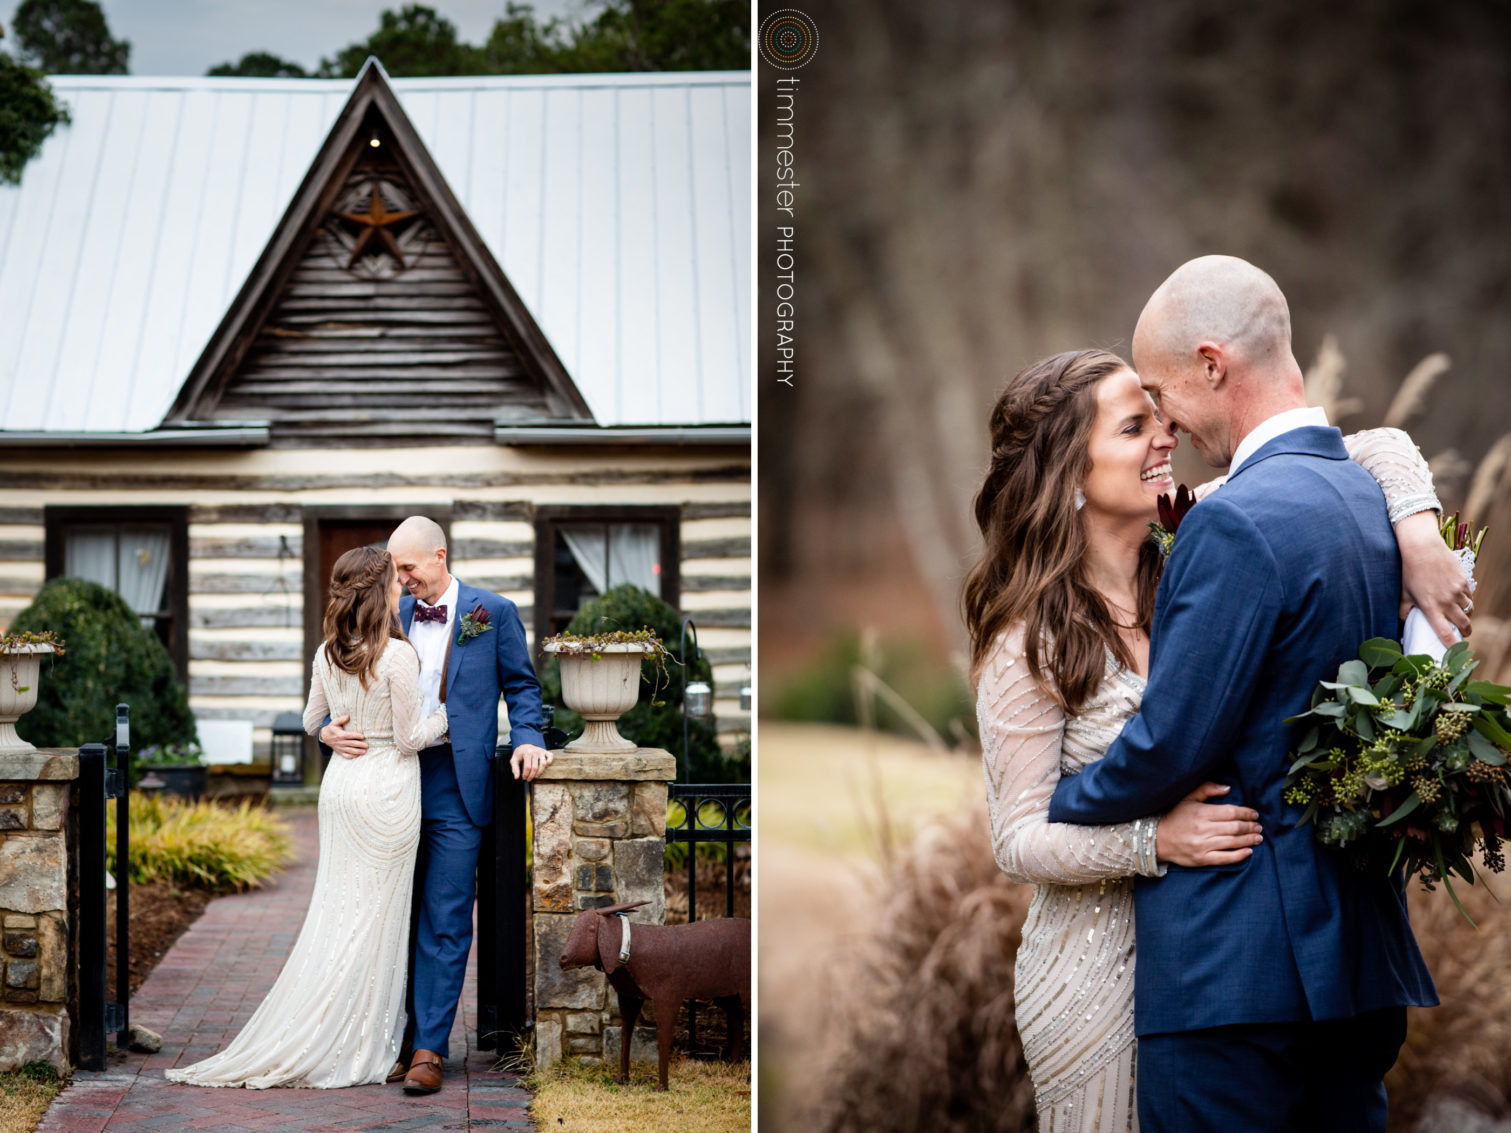 A gorgeous wedding and Bride & Groom at Chapel Hill Carriage House in North Carolina